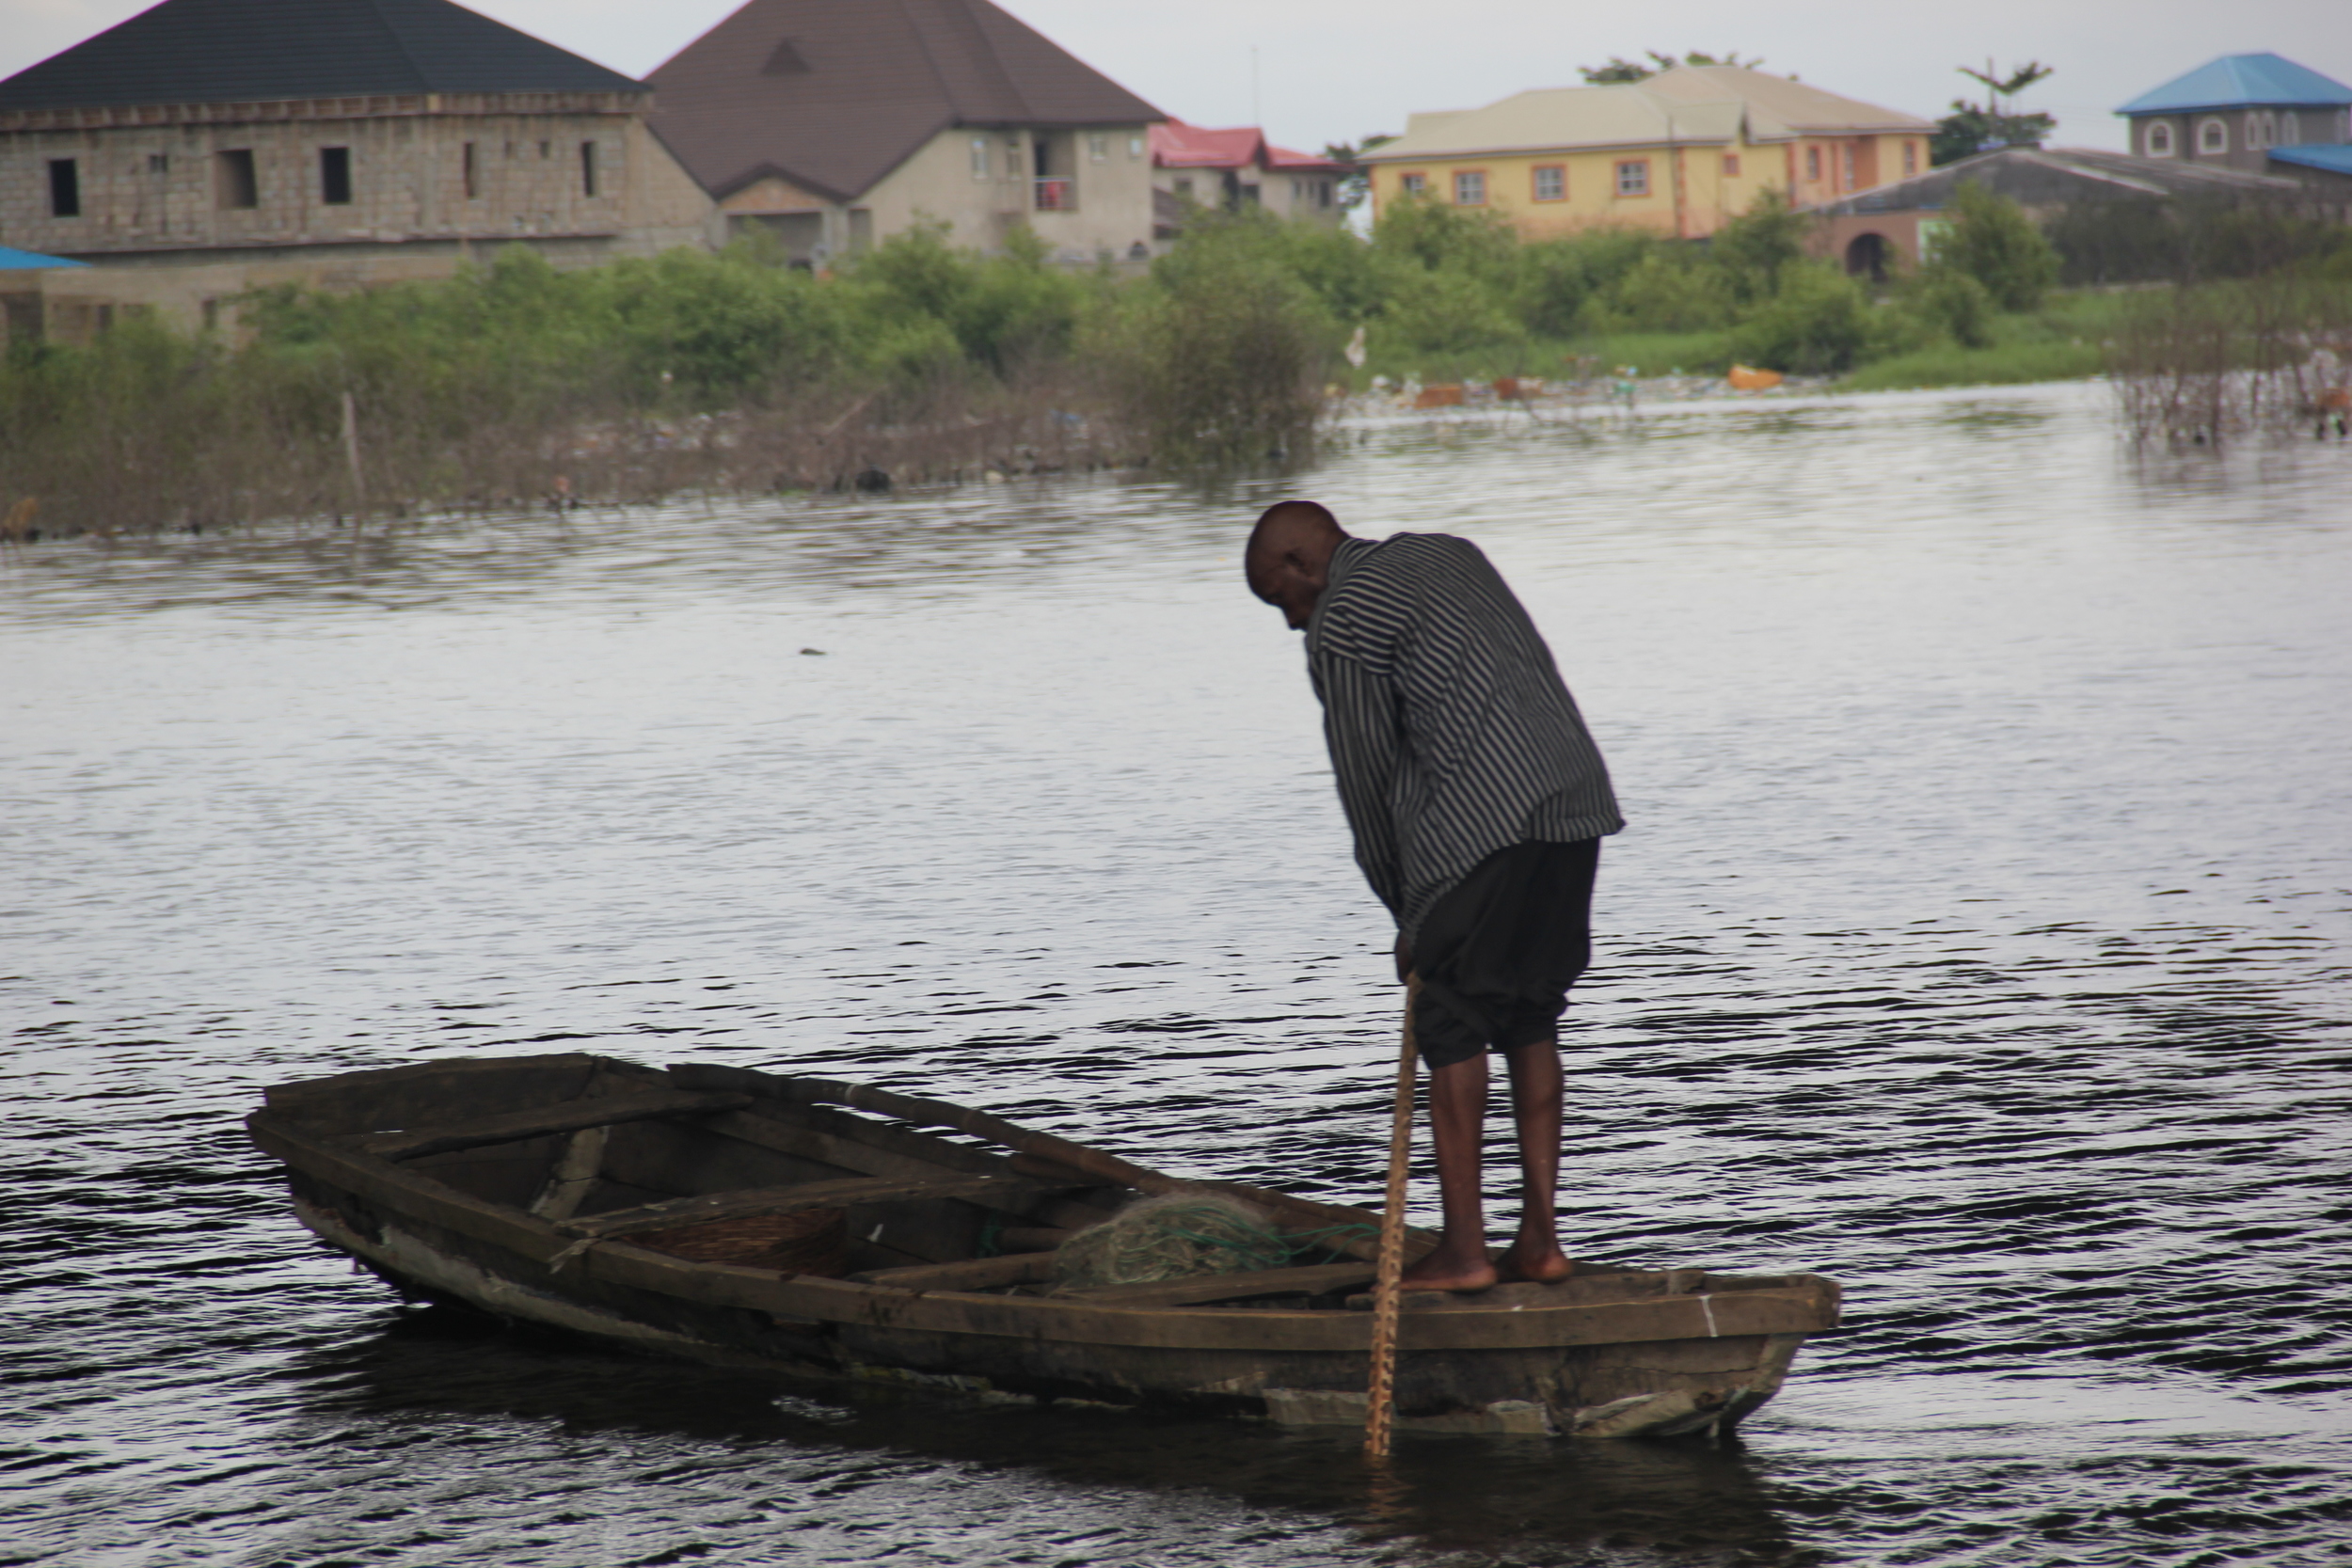 River man - Image taken by young person Gbolahan Abolade.JPG